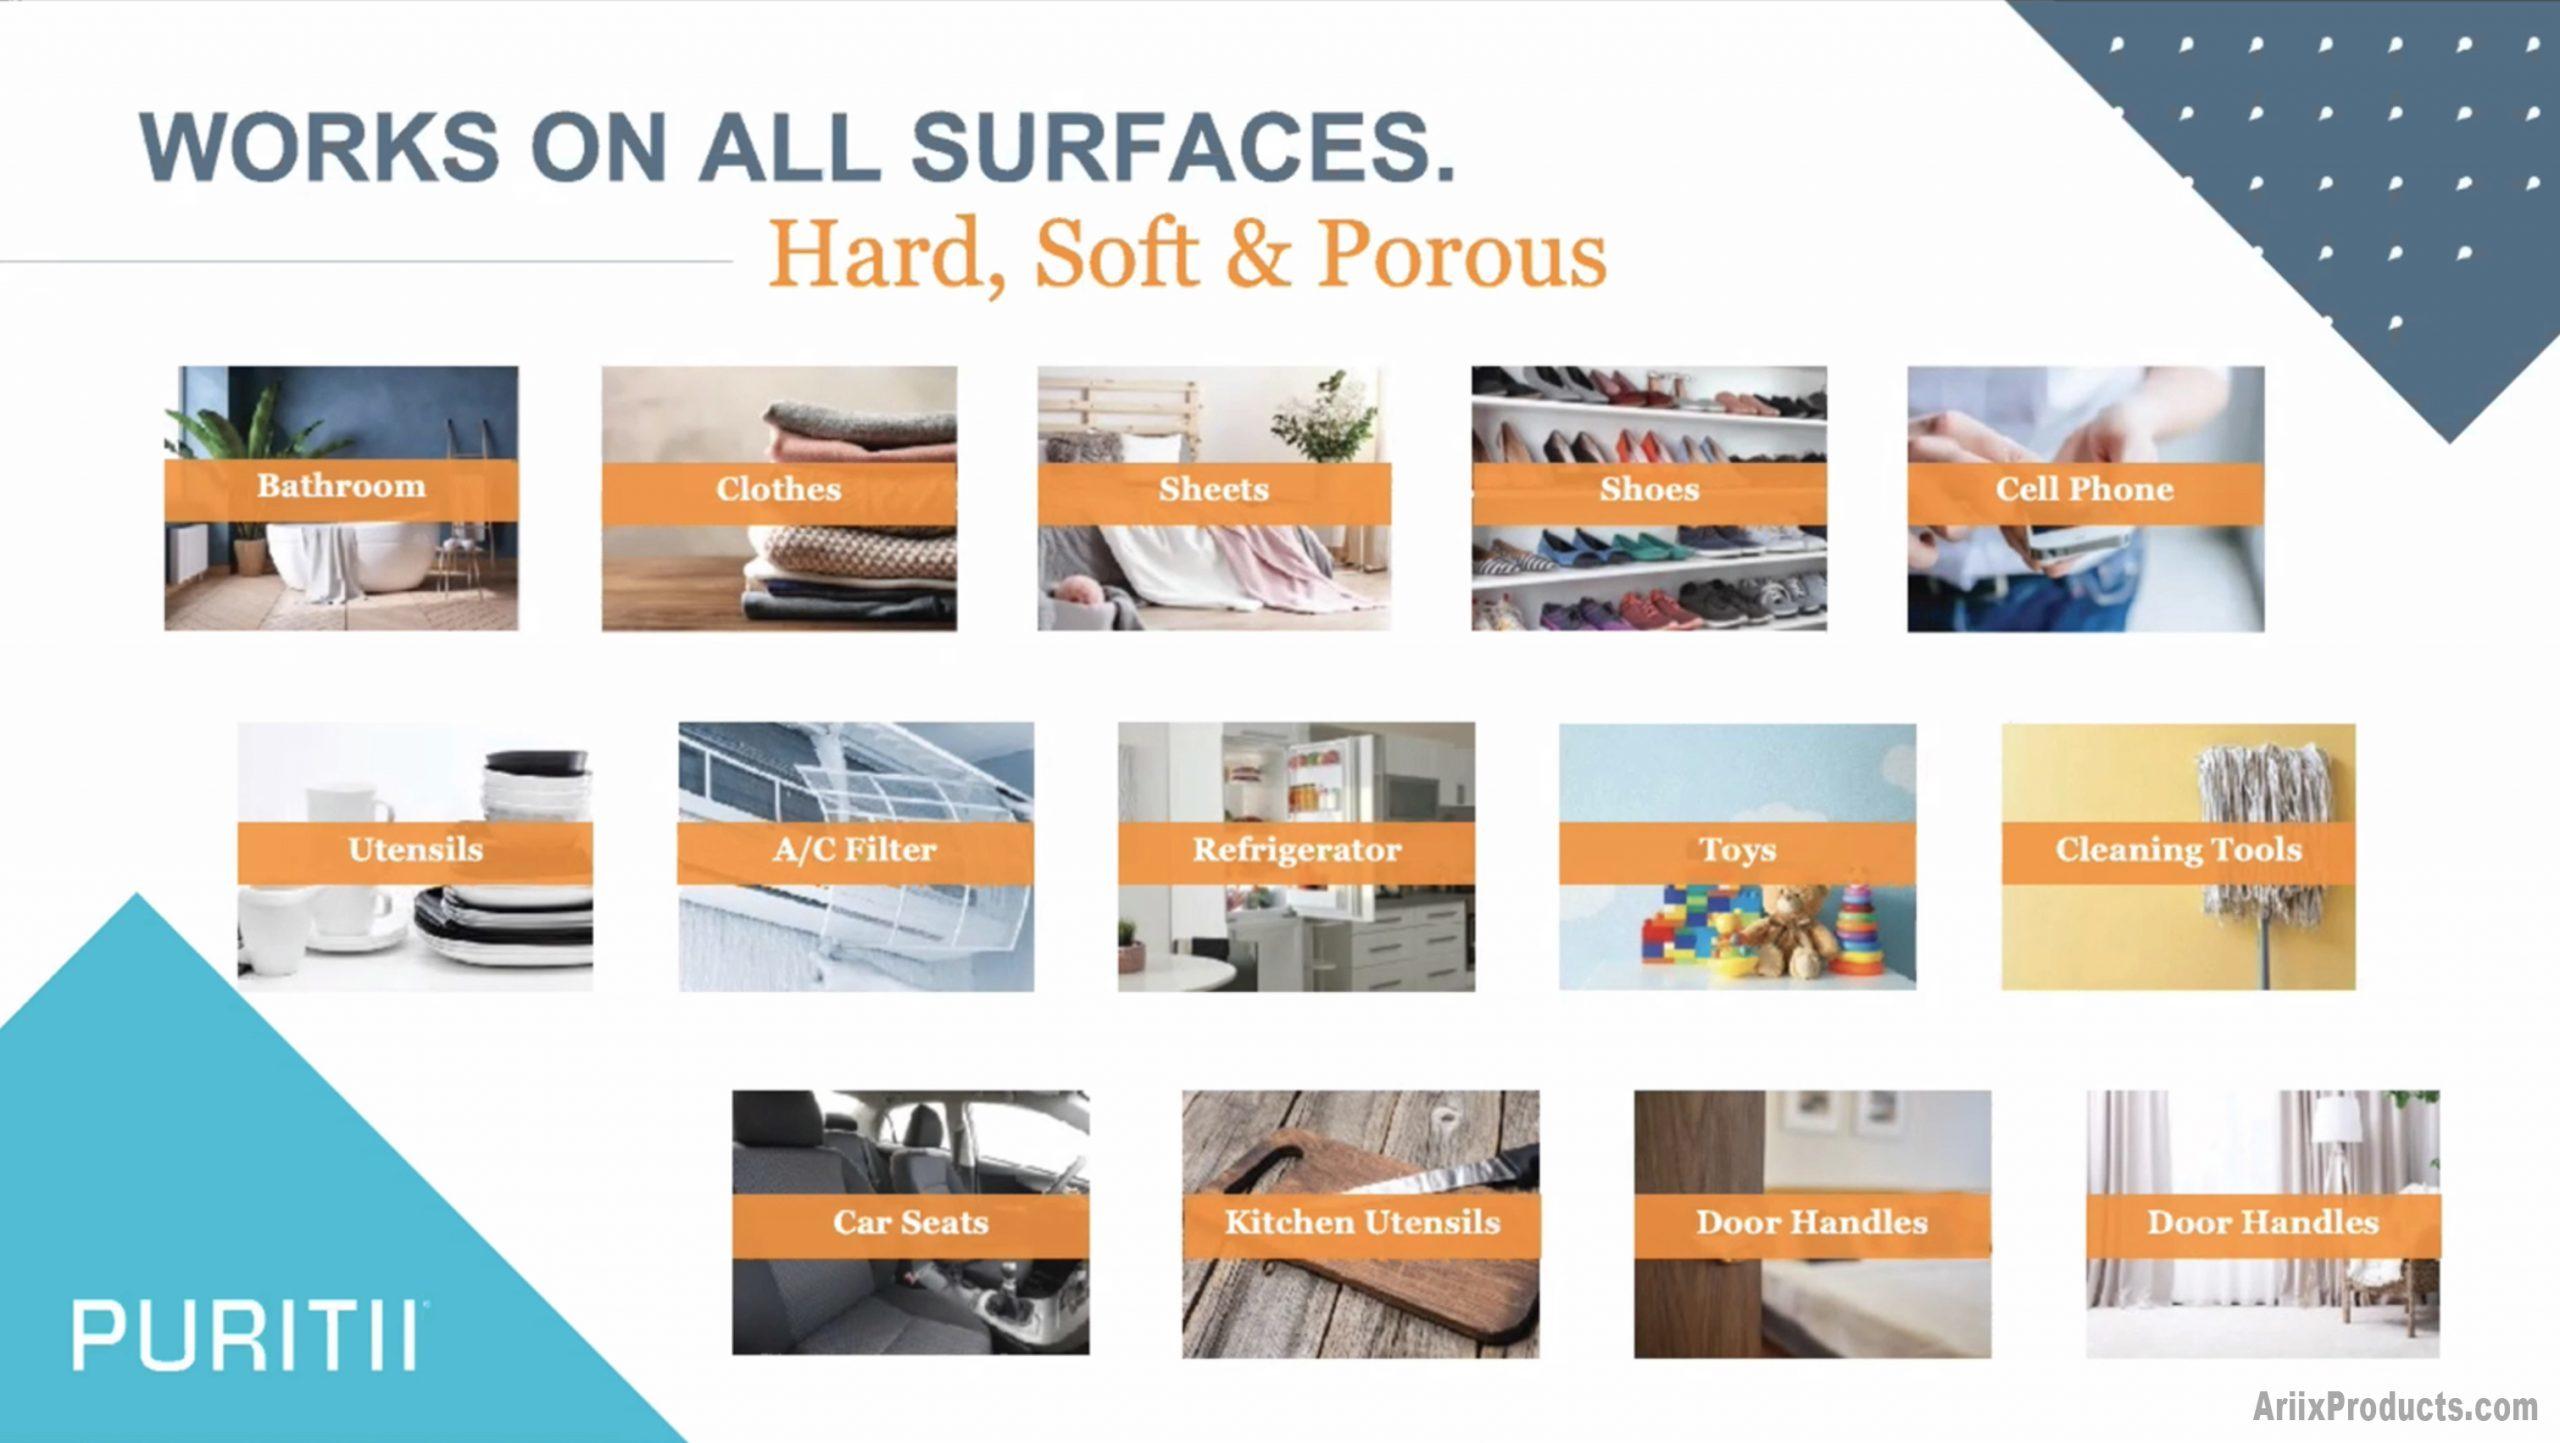 10 Works on All Surfaces